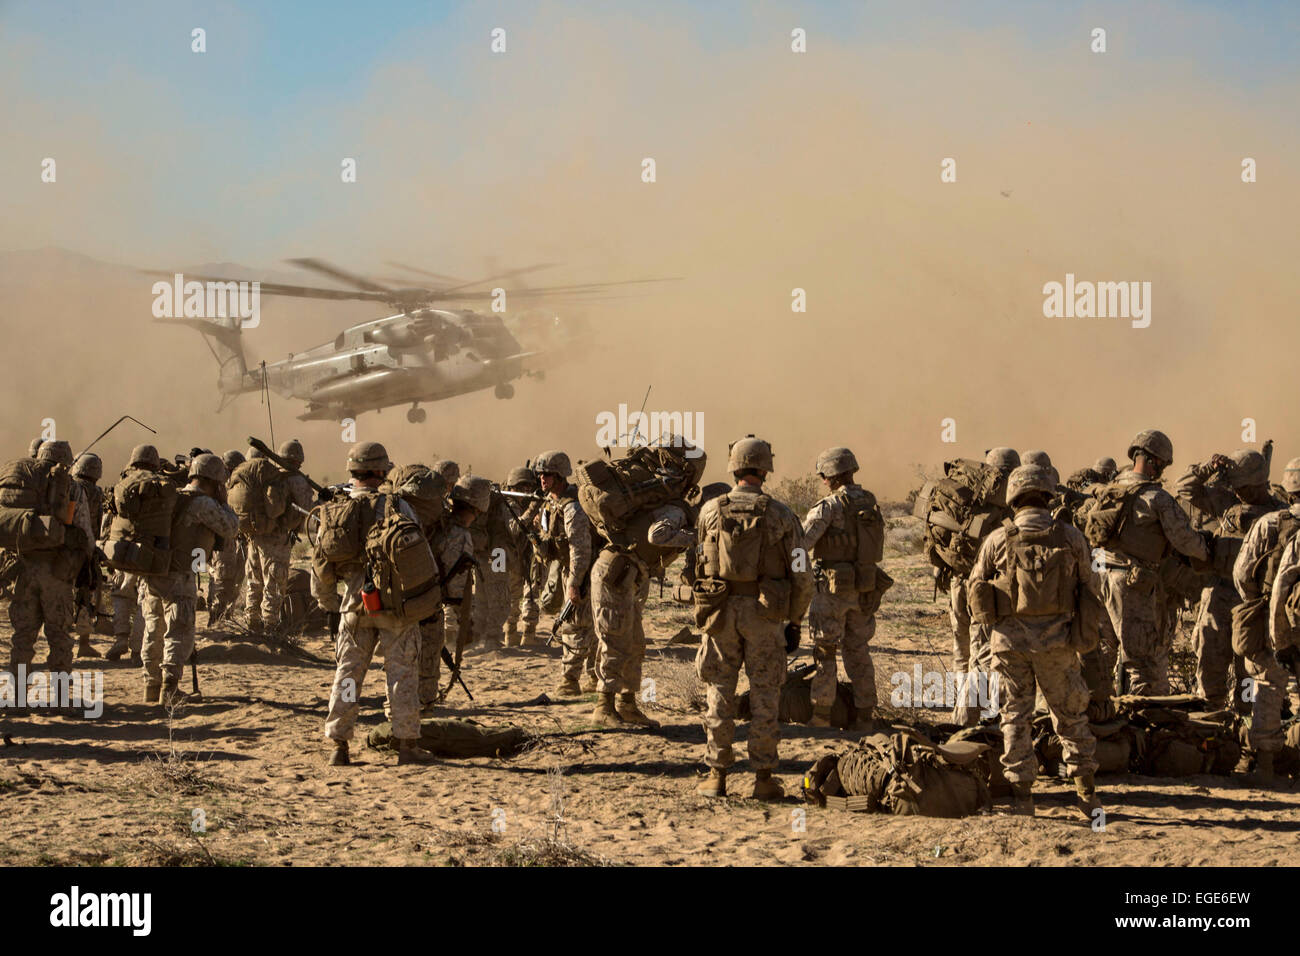 US Marines load onto CH-53E Super Stallion helicopters during Battalion Assault Course February 12, 2015 at Marine Corps Base Twentynine Palms, California. Stock Photo